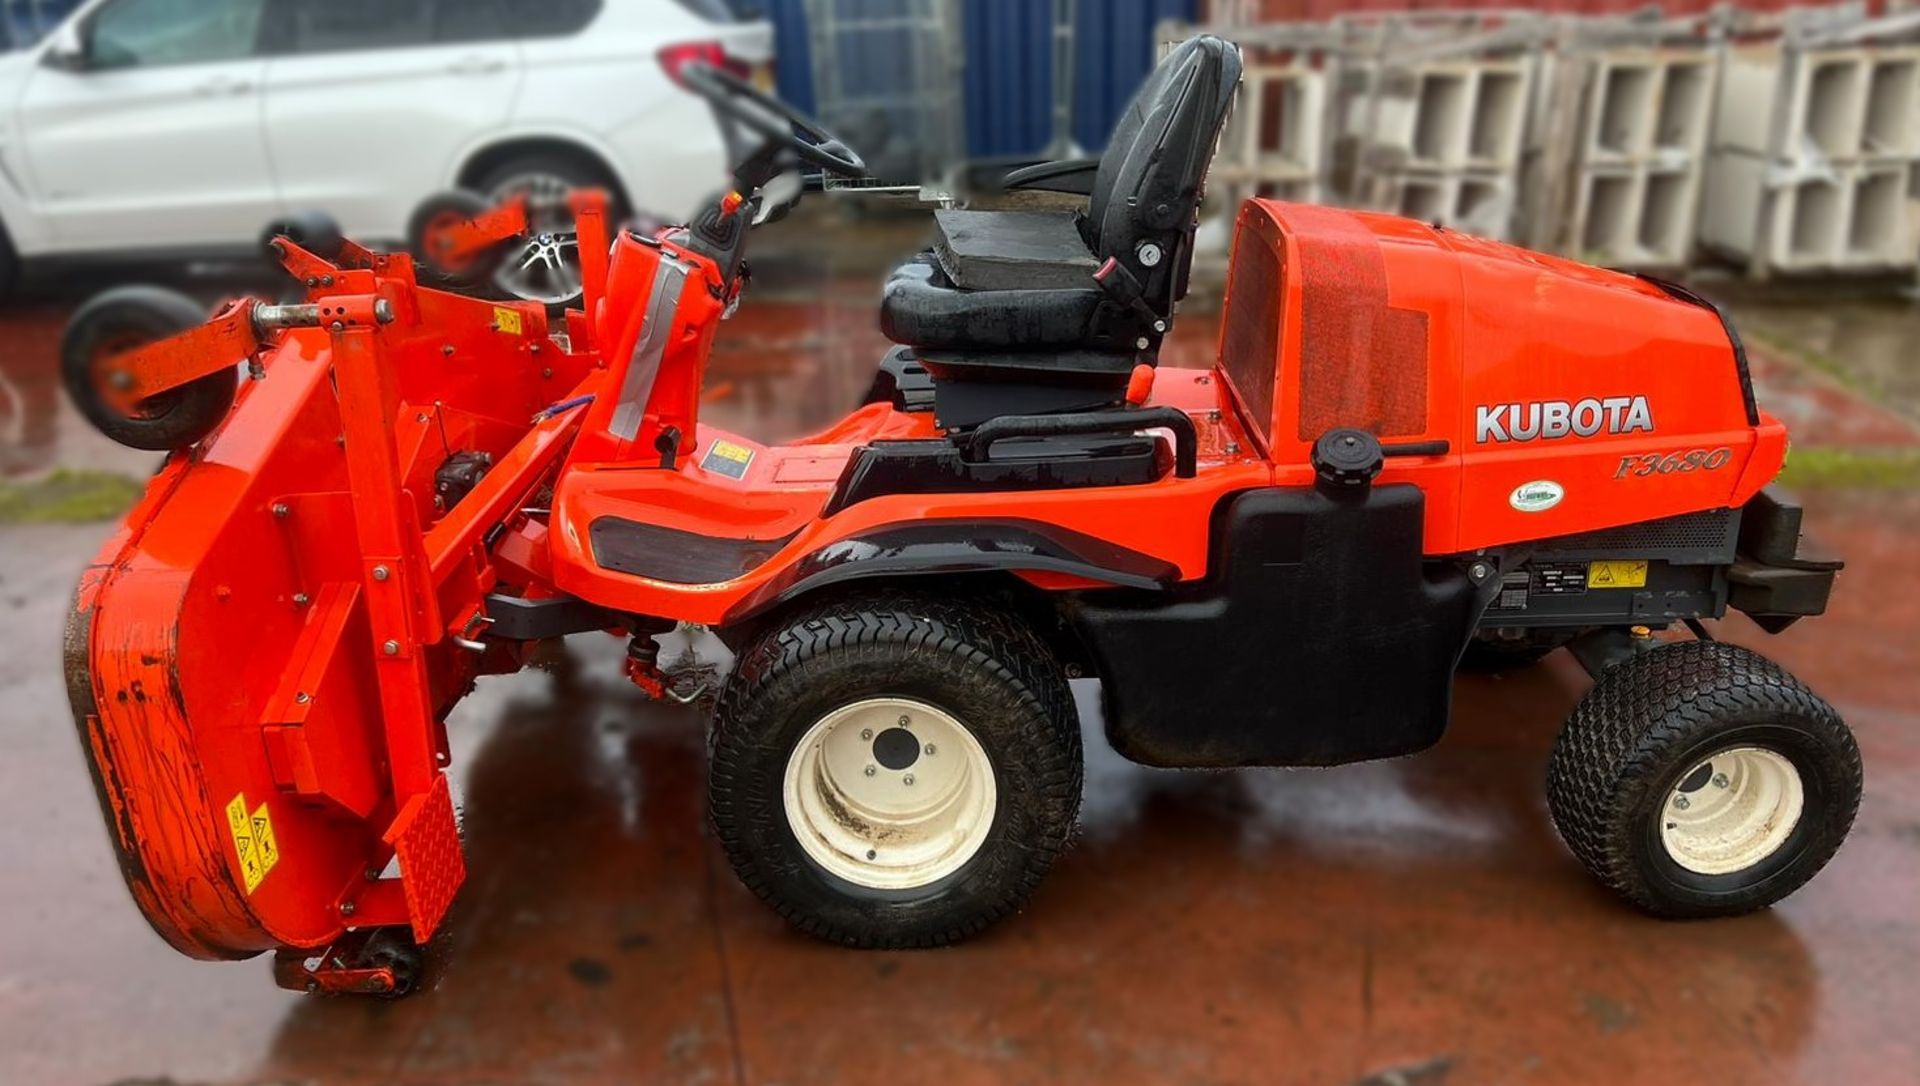 A Kubota F3680-EC 4WD Ride On Mower with 3 blade Mower Deck (one blade missing) and towing hitch, - Image 4 of 13